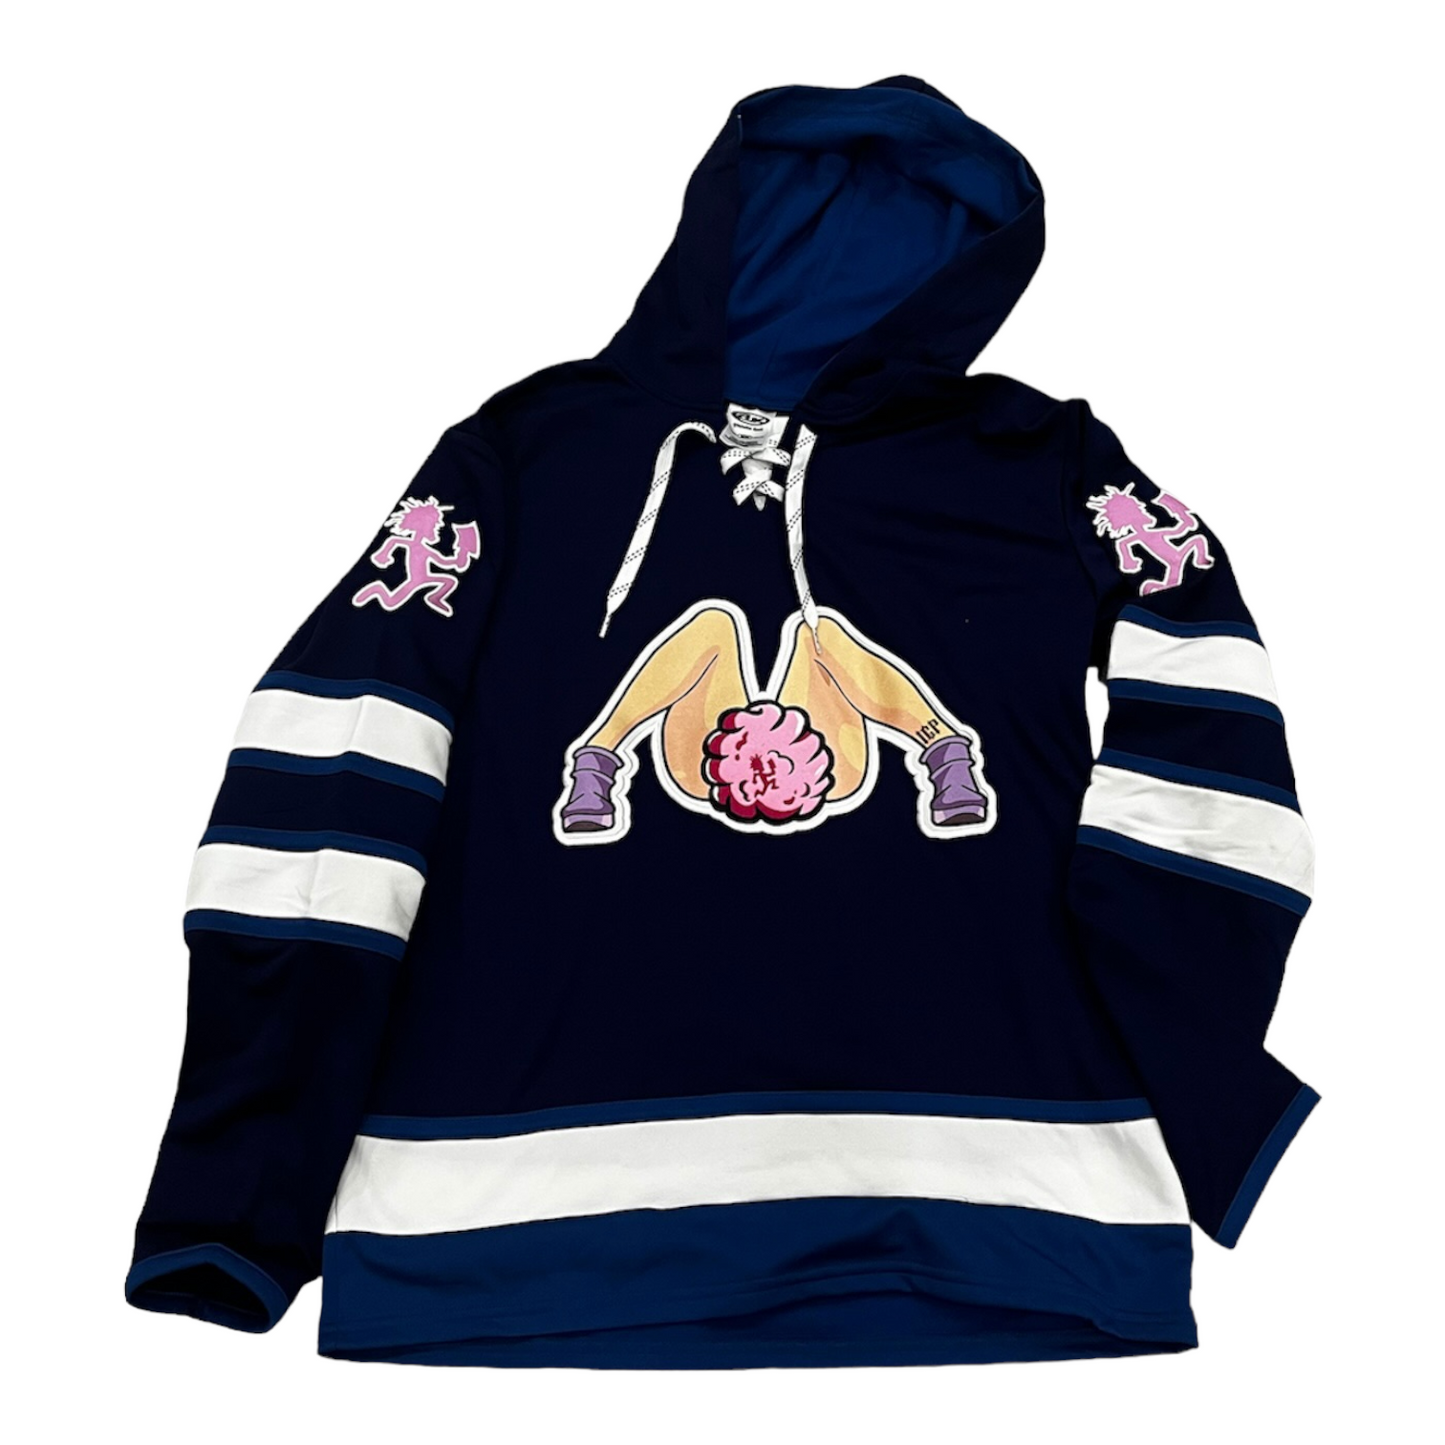 Cotton Candy Hockey Hoodie